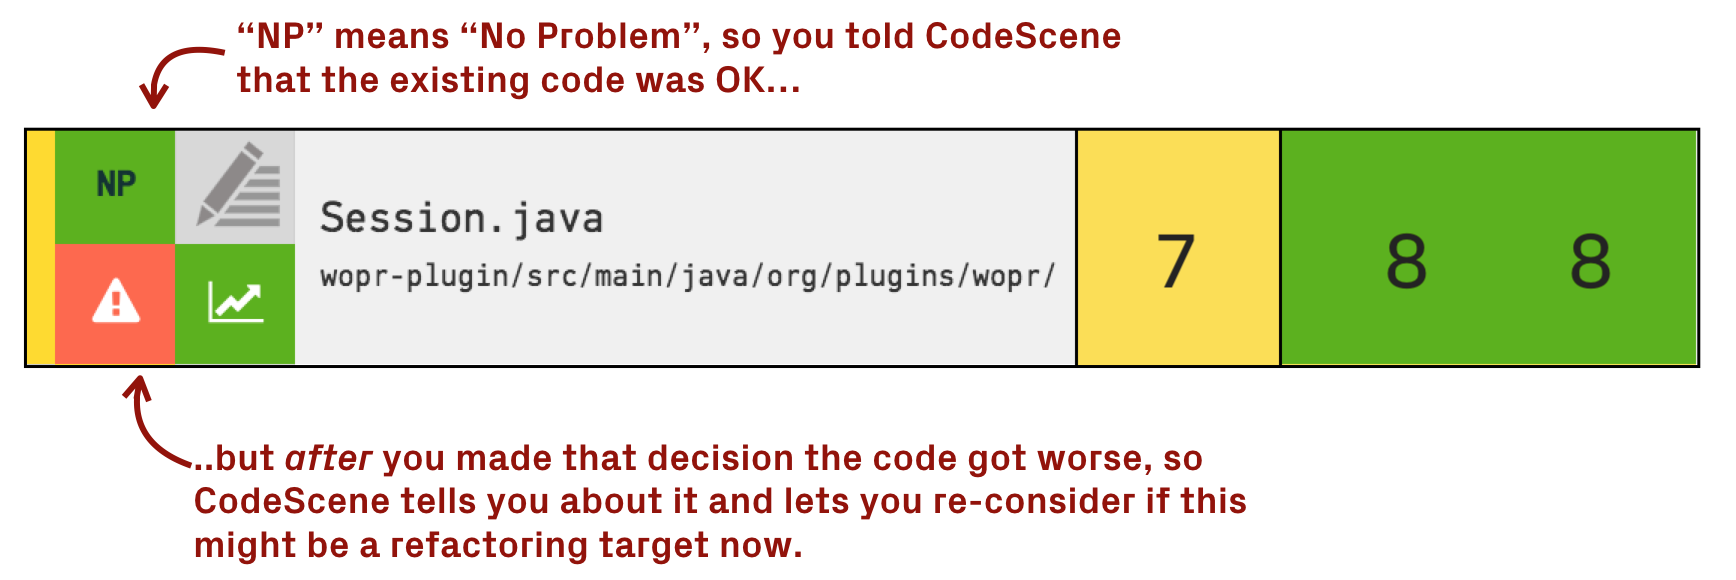 In the background, CodeScene continues to scan hotspots marked as No Problem to ensure they stay that way.